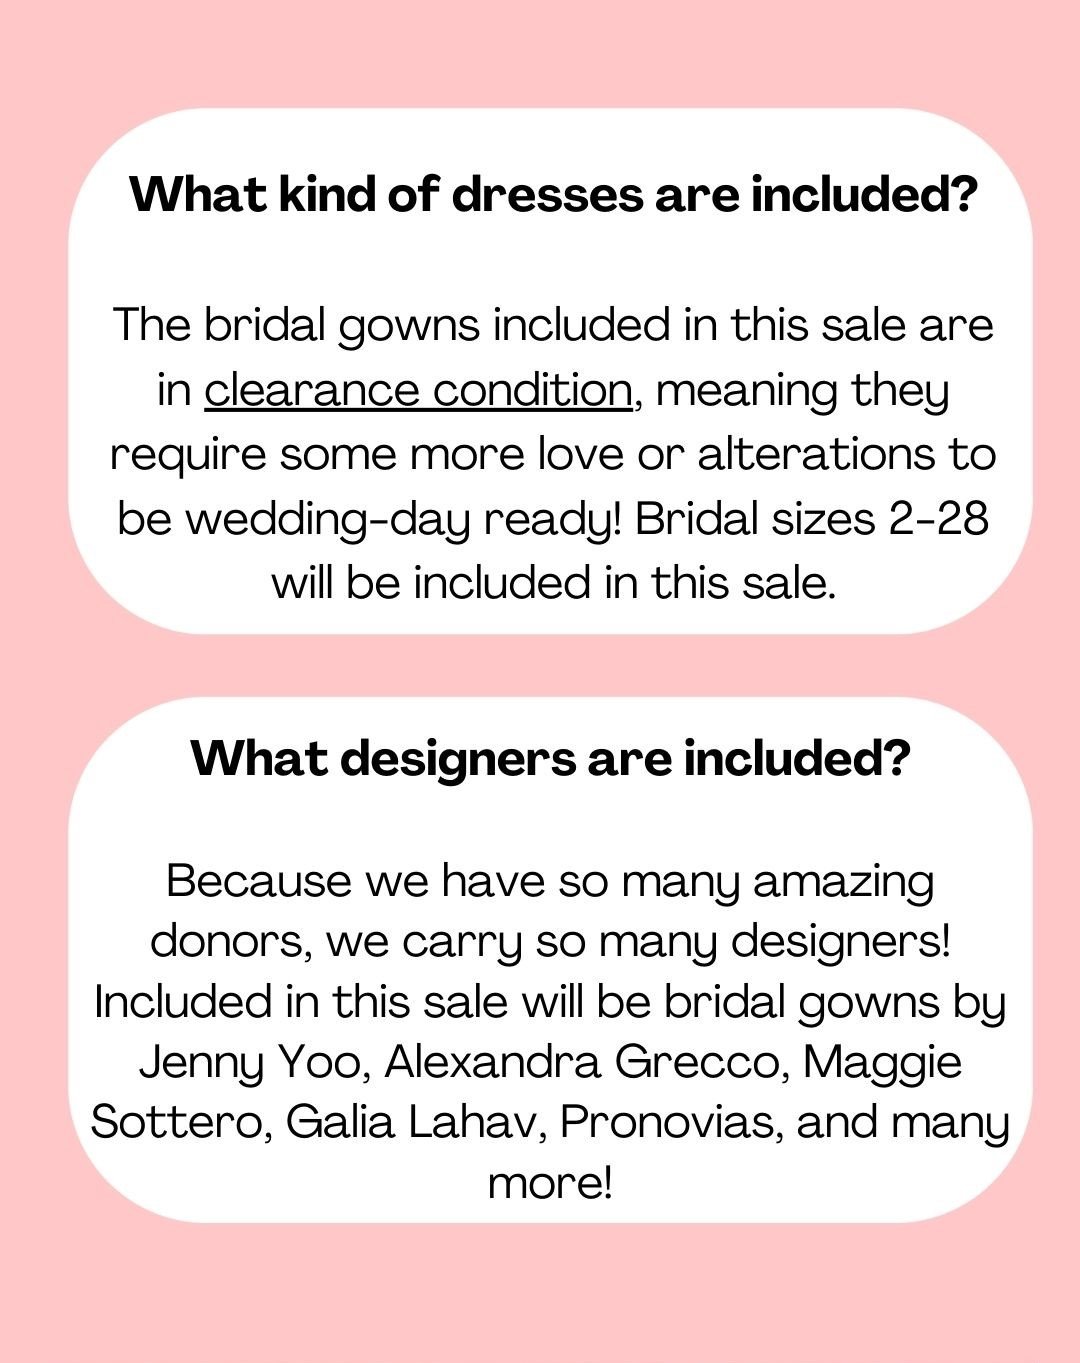 Bridal Blowout infographic.jpg